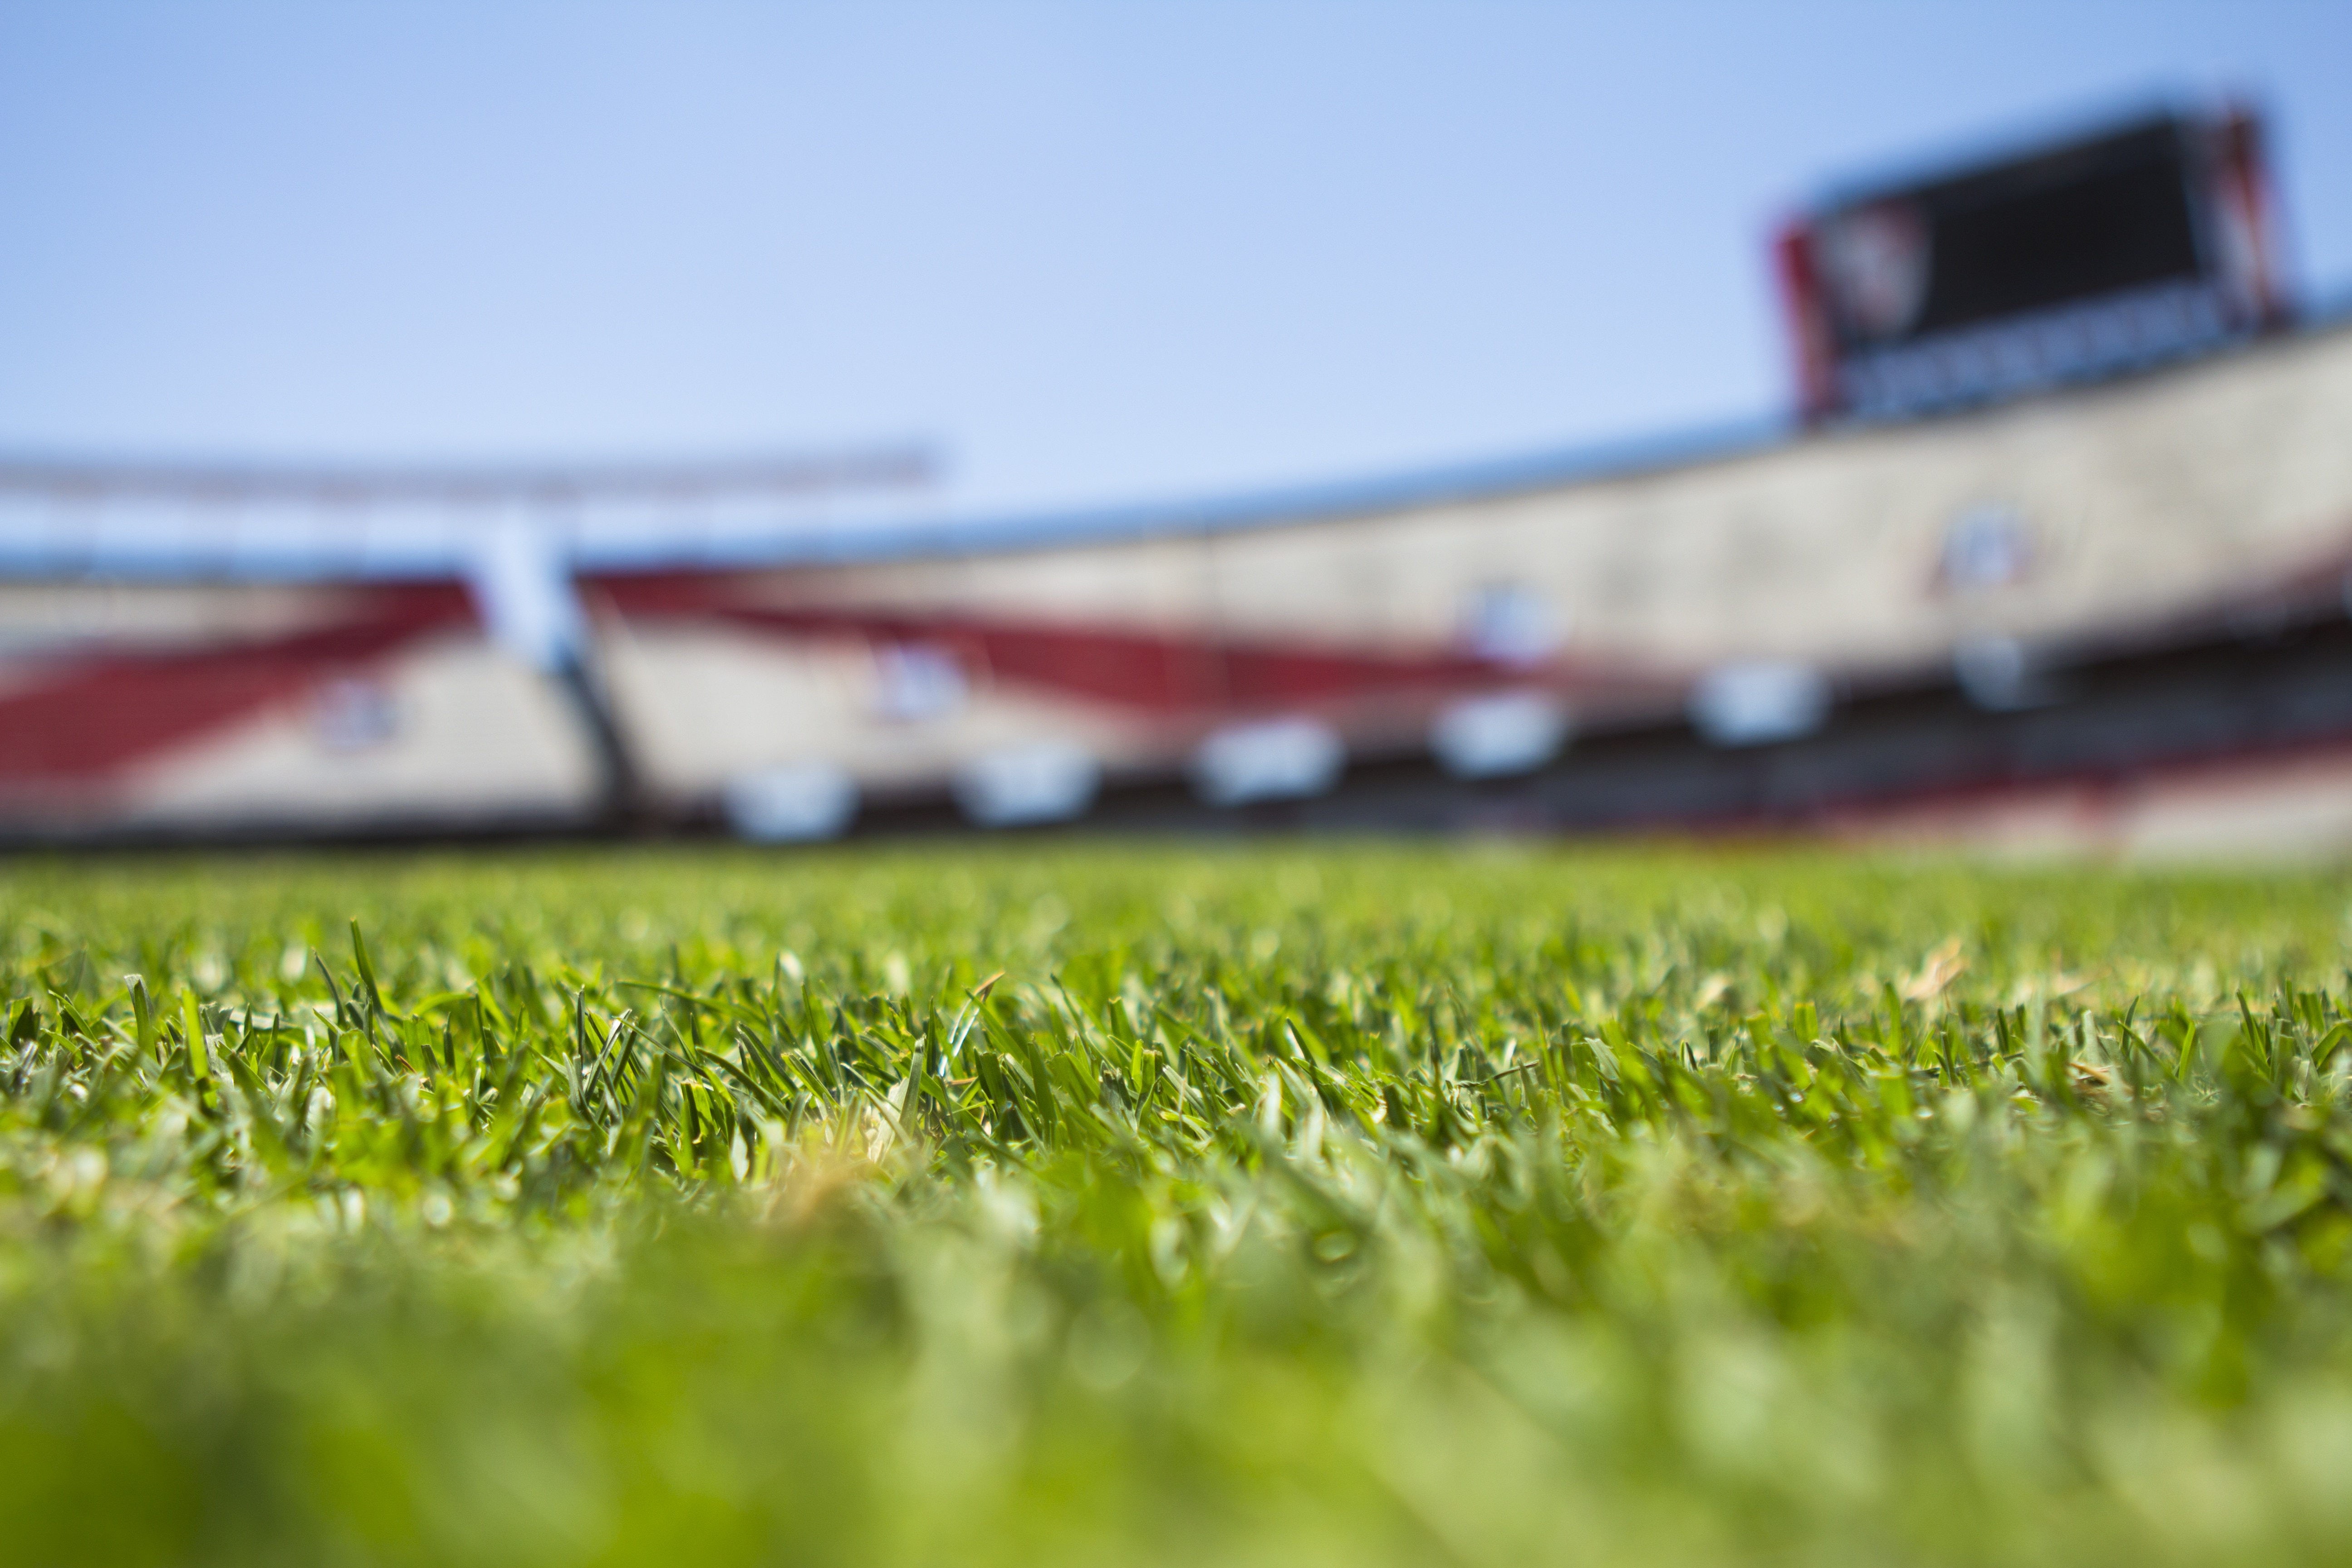 close up photography of grass field under clear sky during daytime